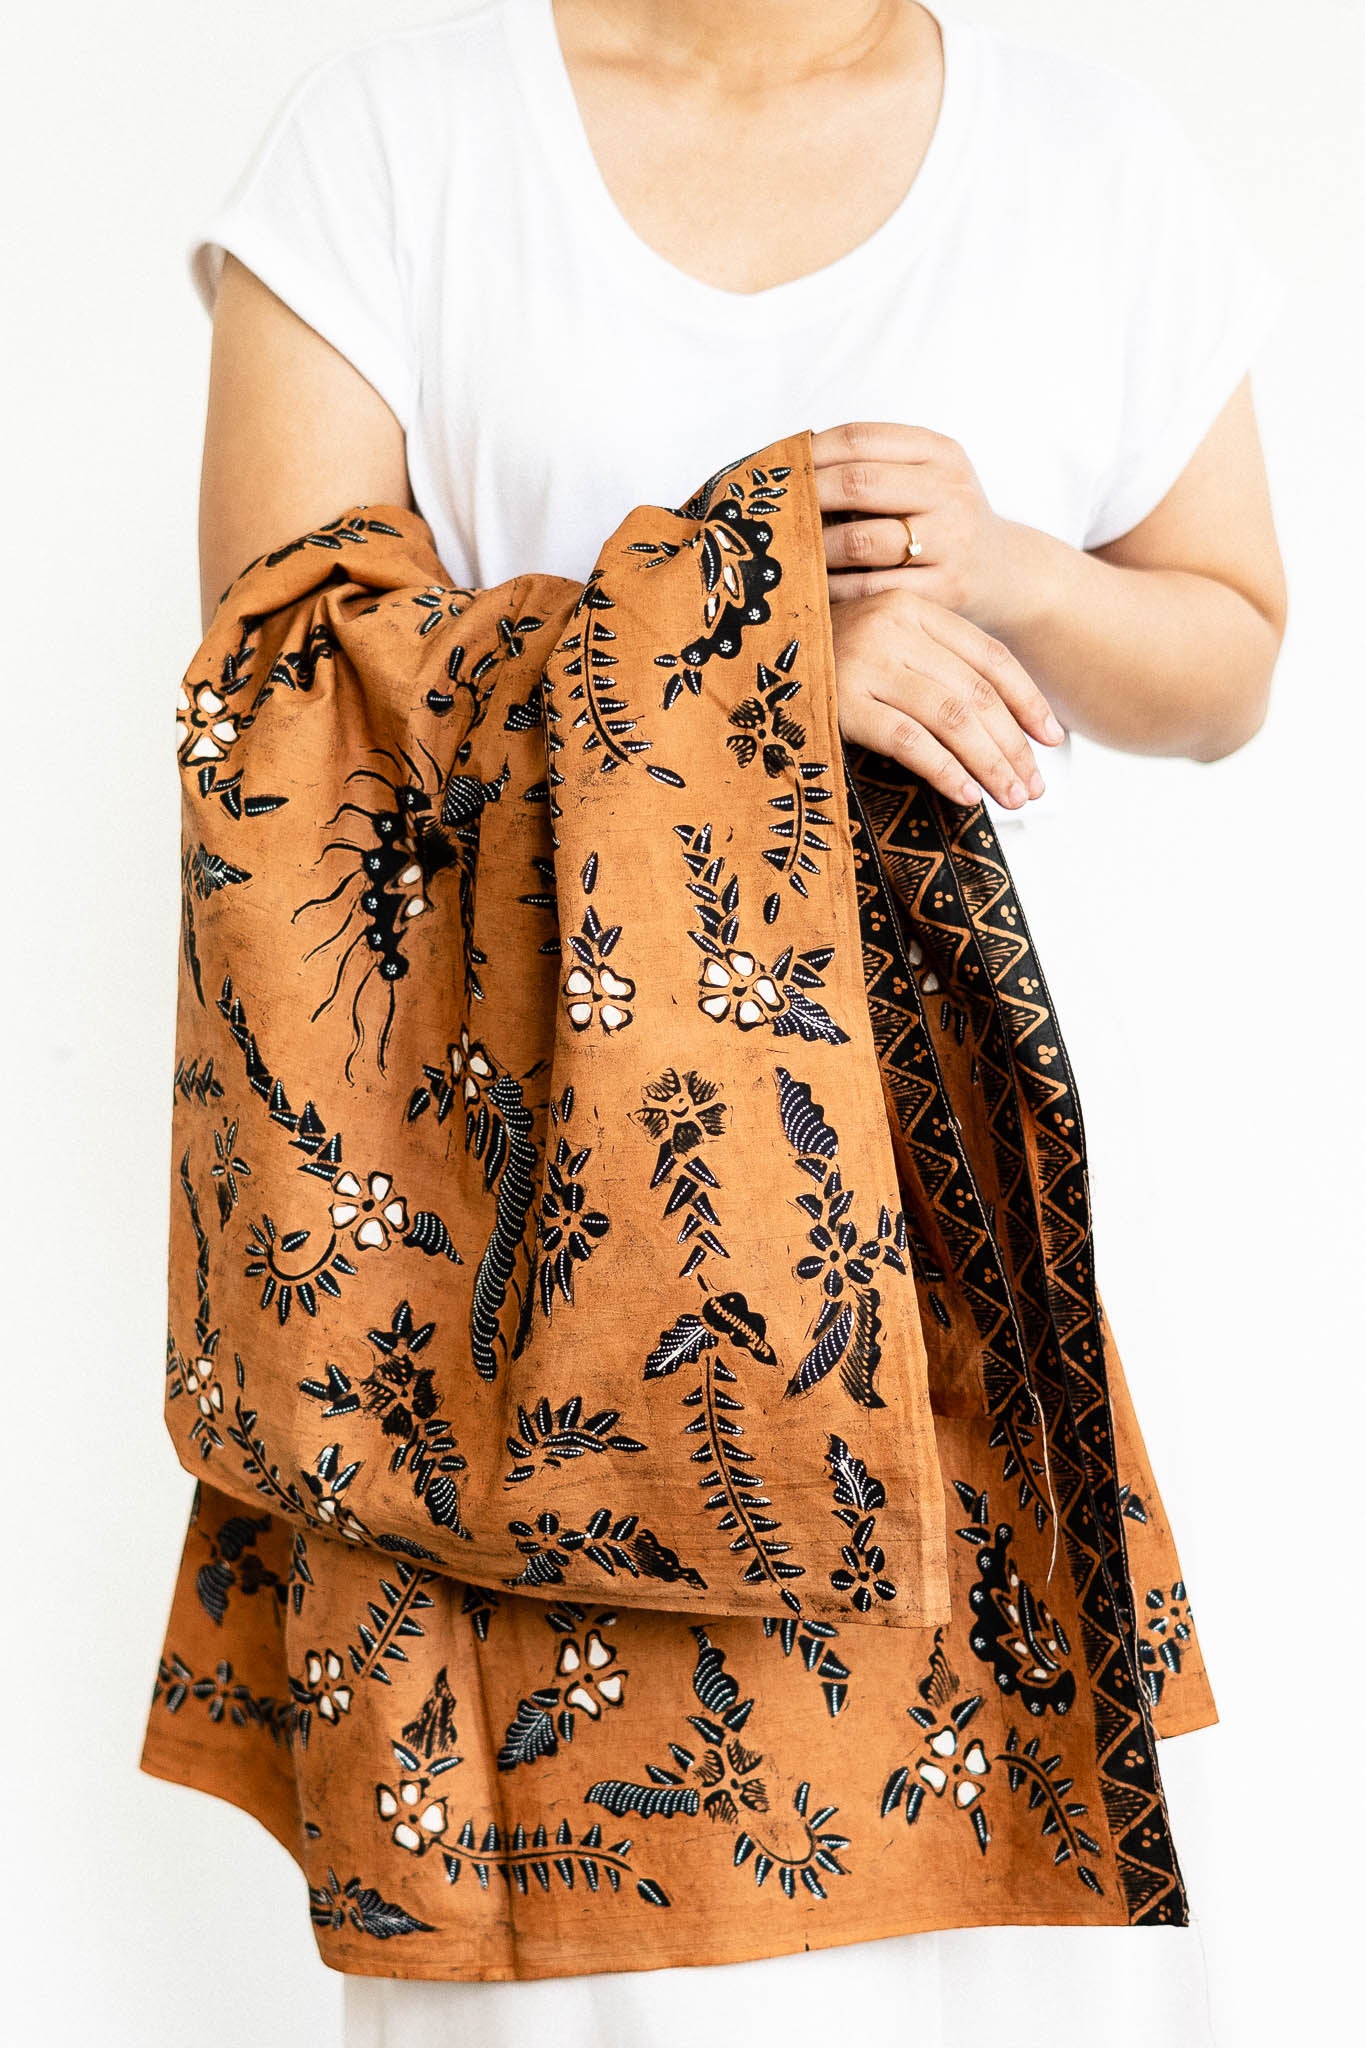 Best Batik and handwoven textiles from Singapore ethical designer Gypsied